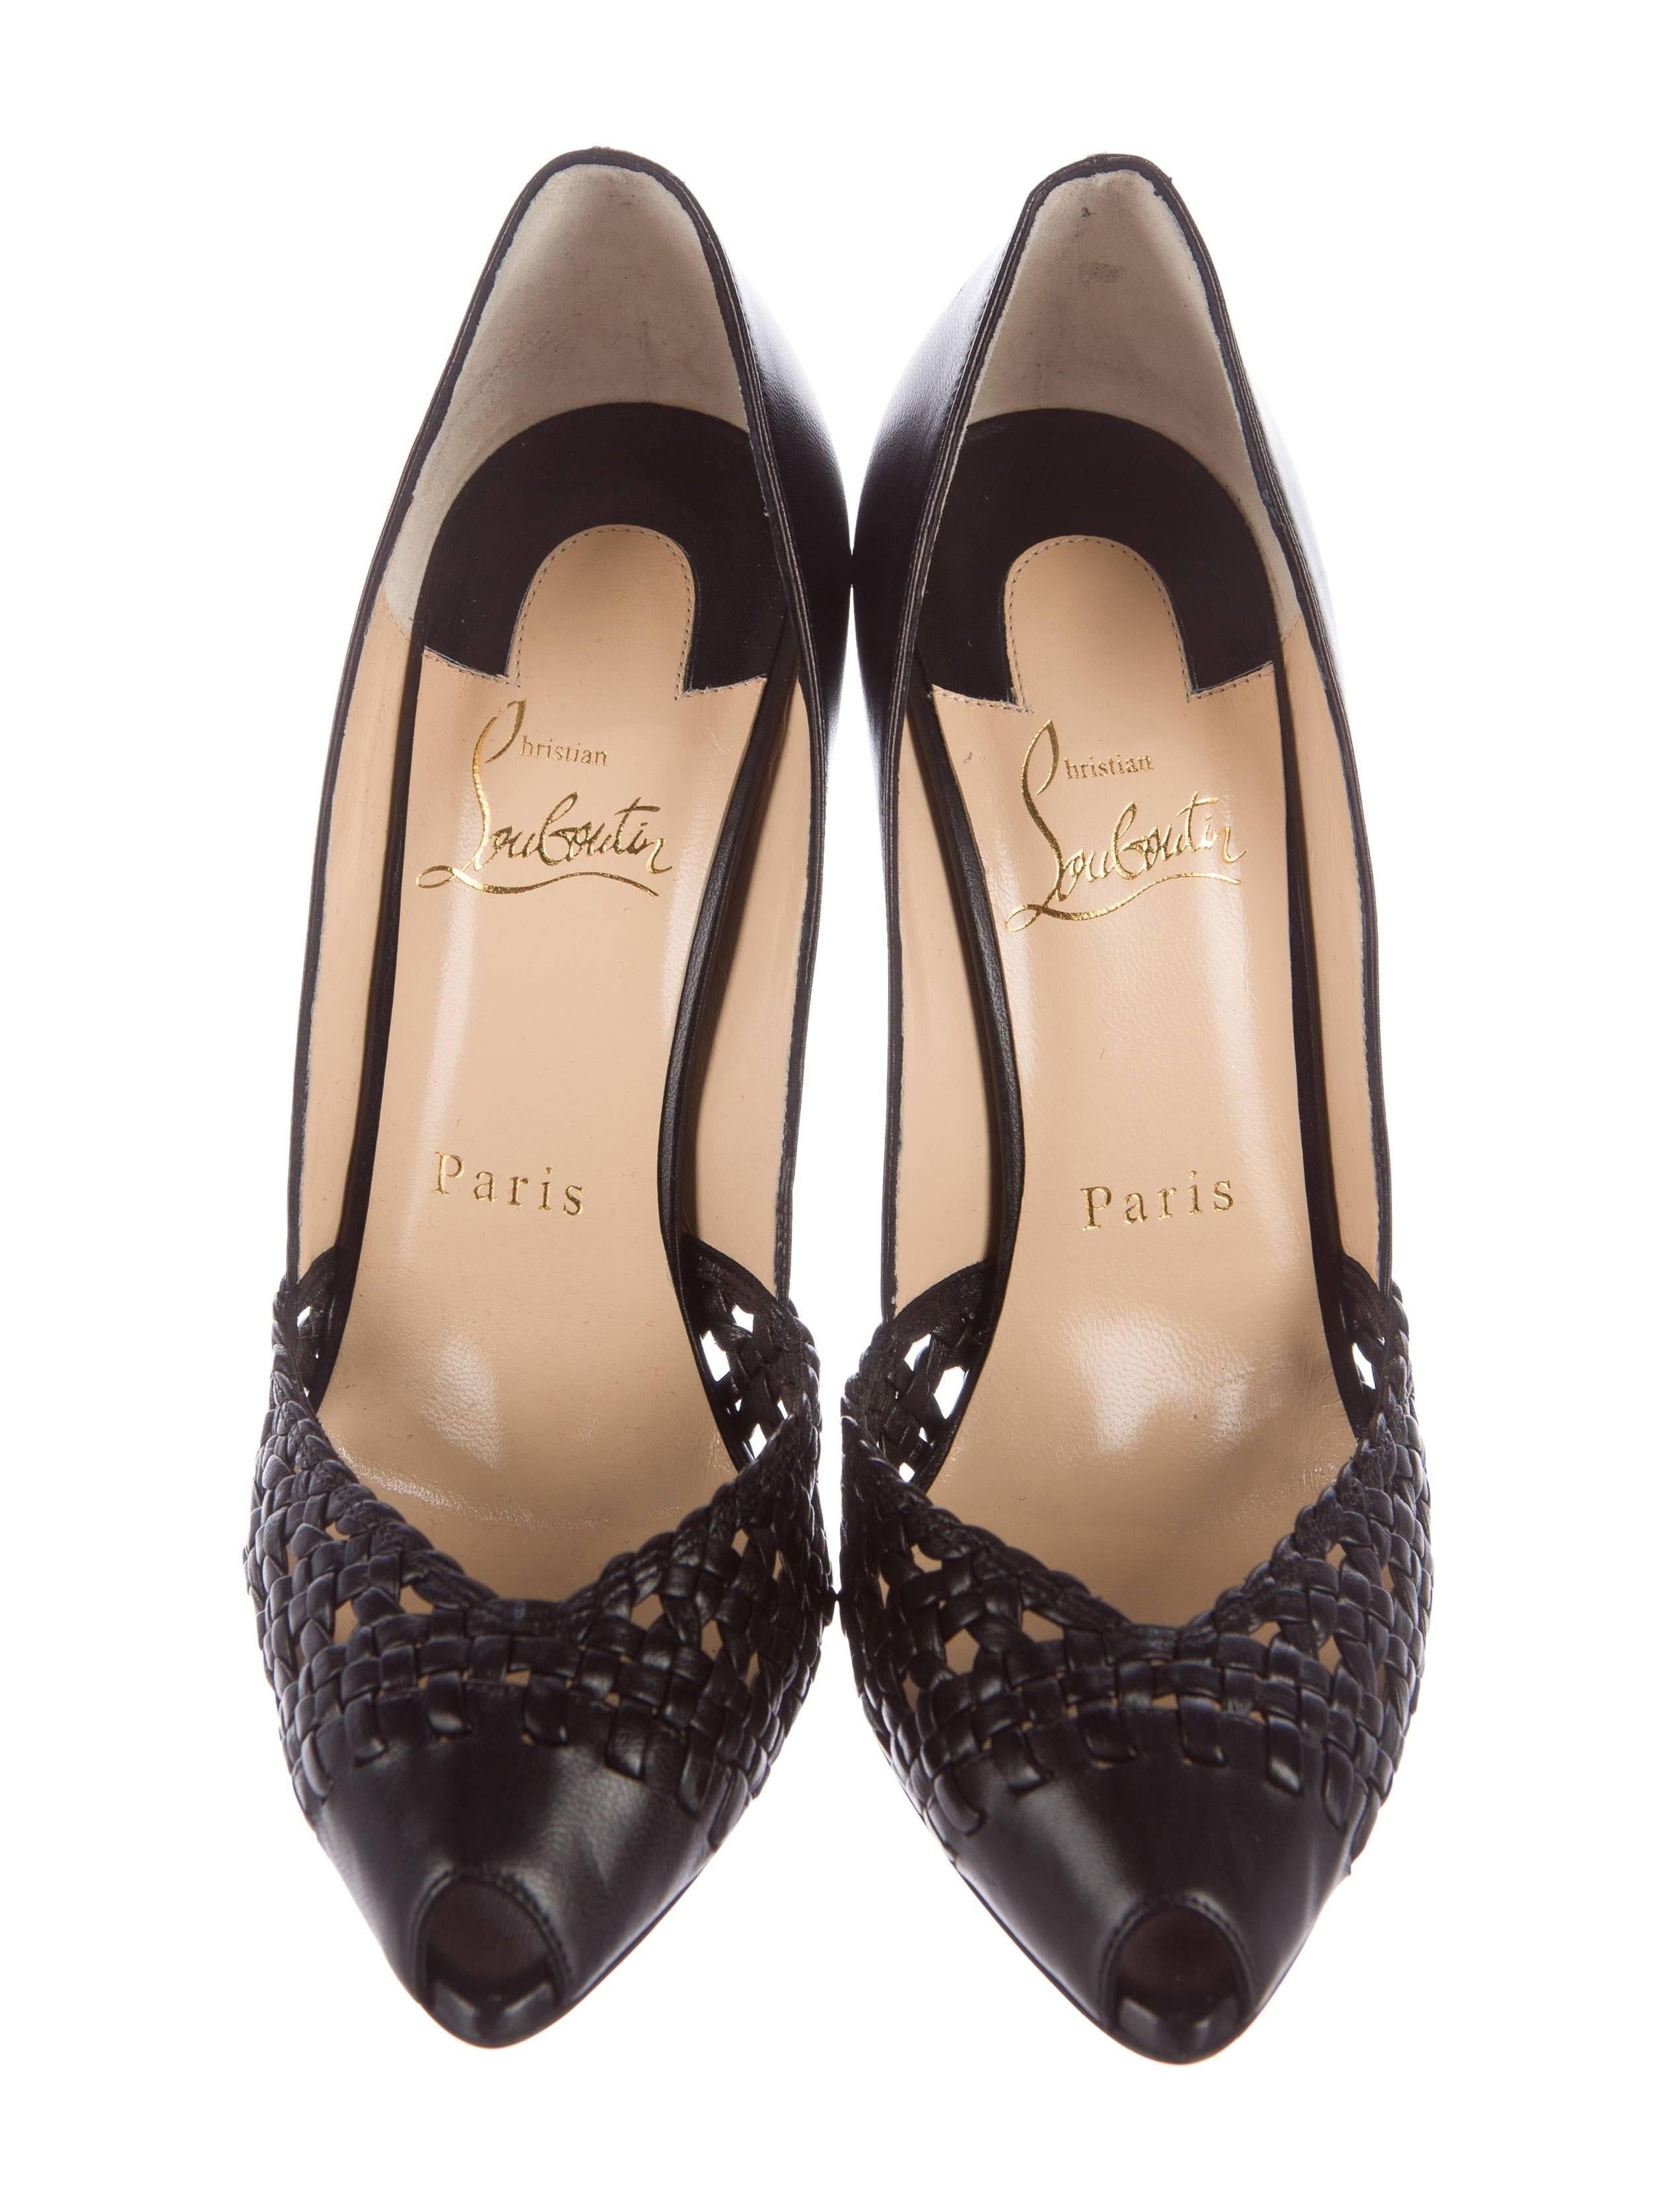 Christian Louboutin New Black Leather Weave Open Toe Evening Pumps Heels in Box In New Condition In Chicago, IL